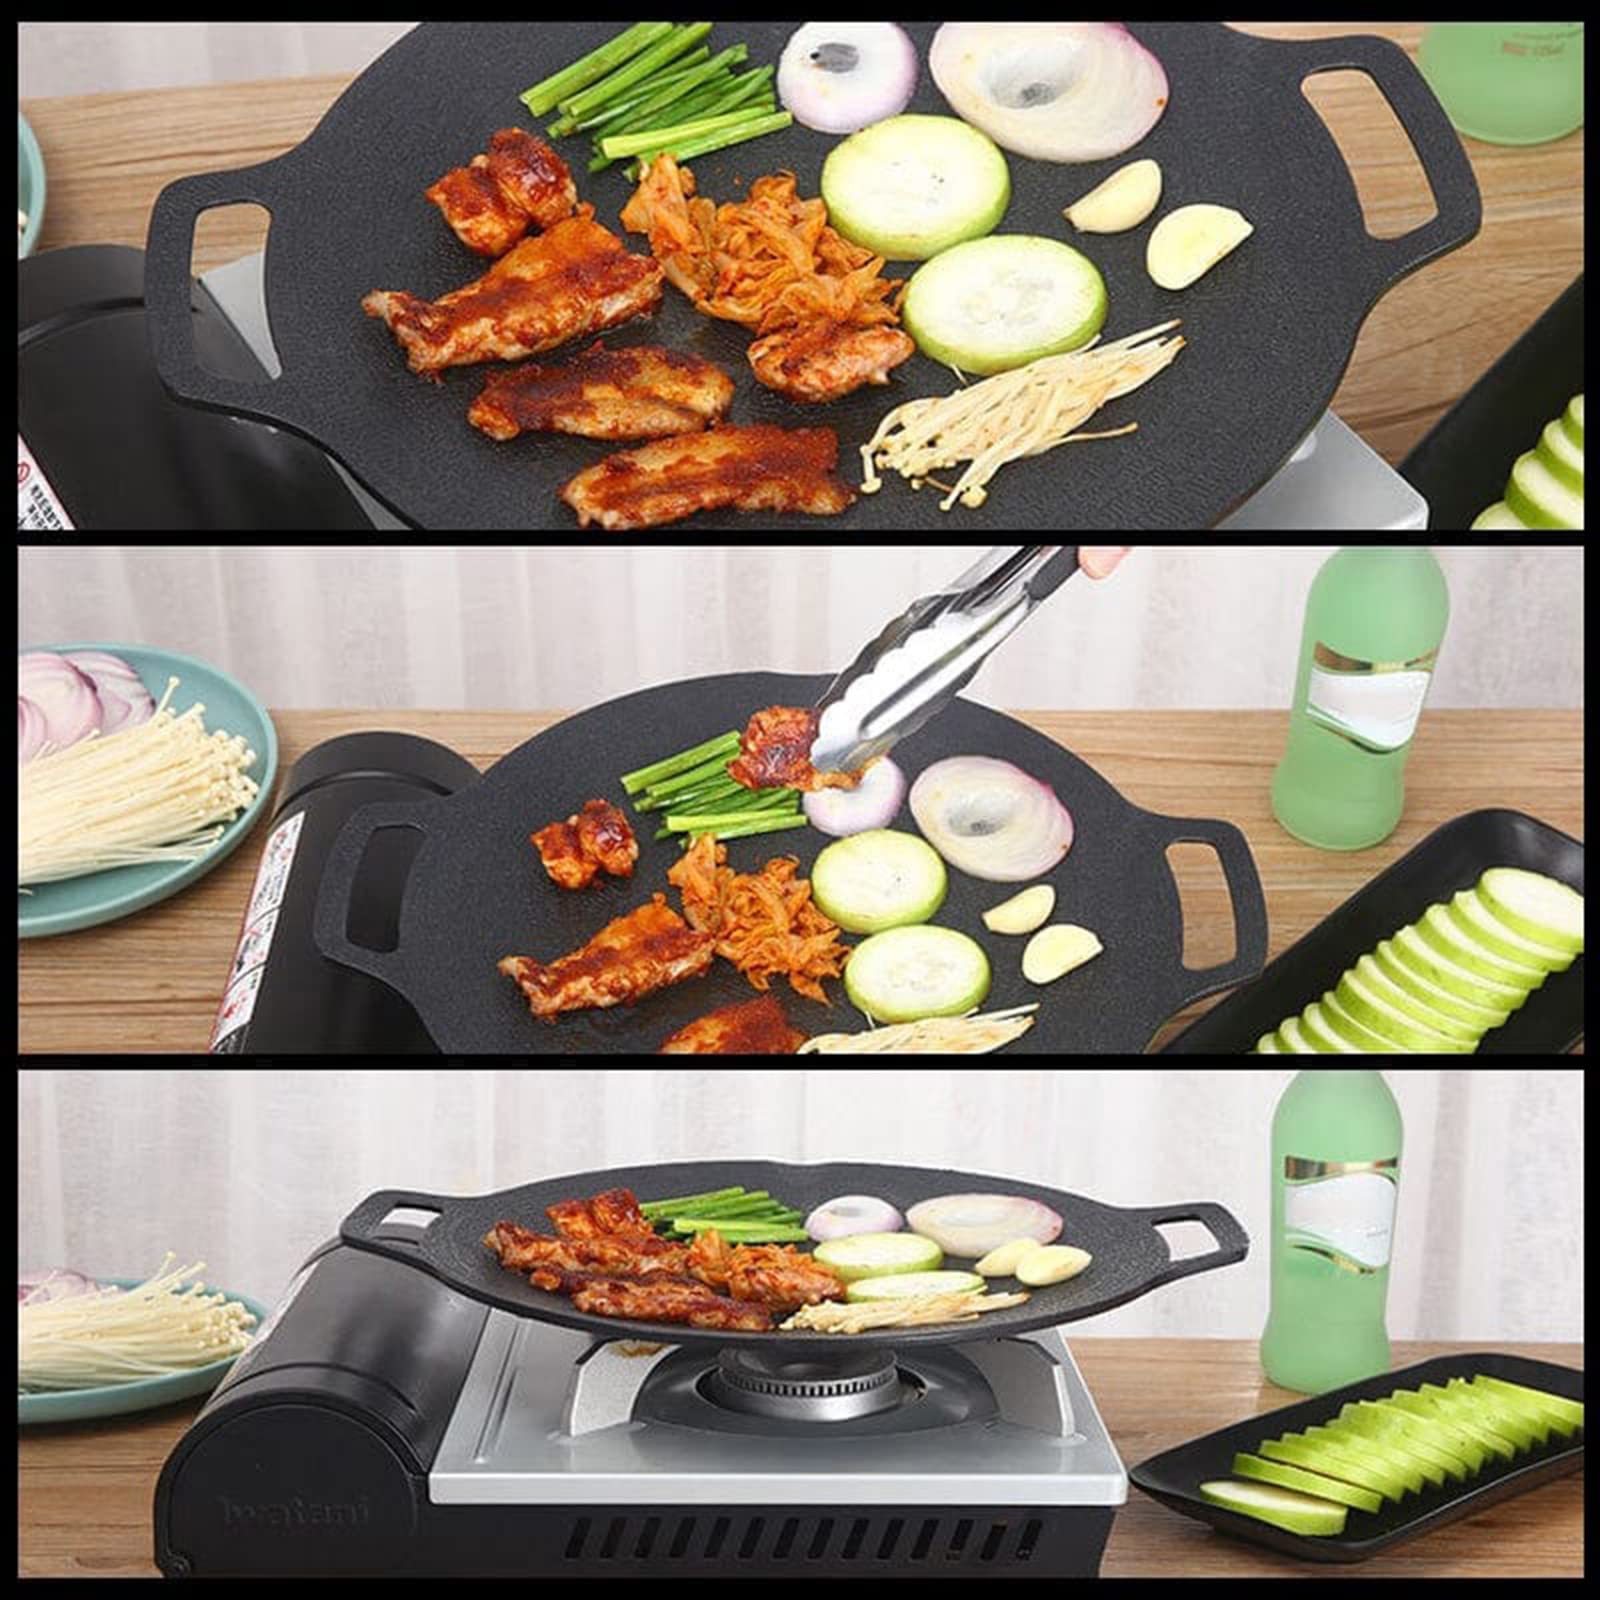 Korean Non-stick Round Baking Pan, 8 in 1 Korean BBQ Grill Pan,Non-stick Granite Coating,Round Griddle Pan, for Both Home and Outdoor stoves Grilling, Frying, Sauteing (12 inches)